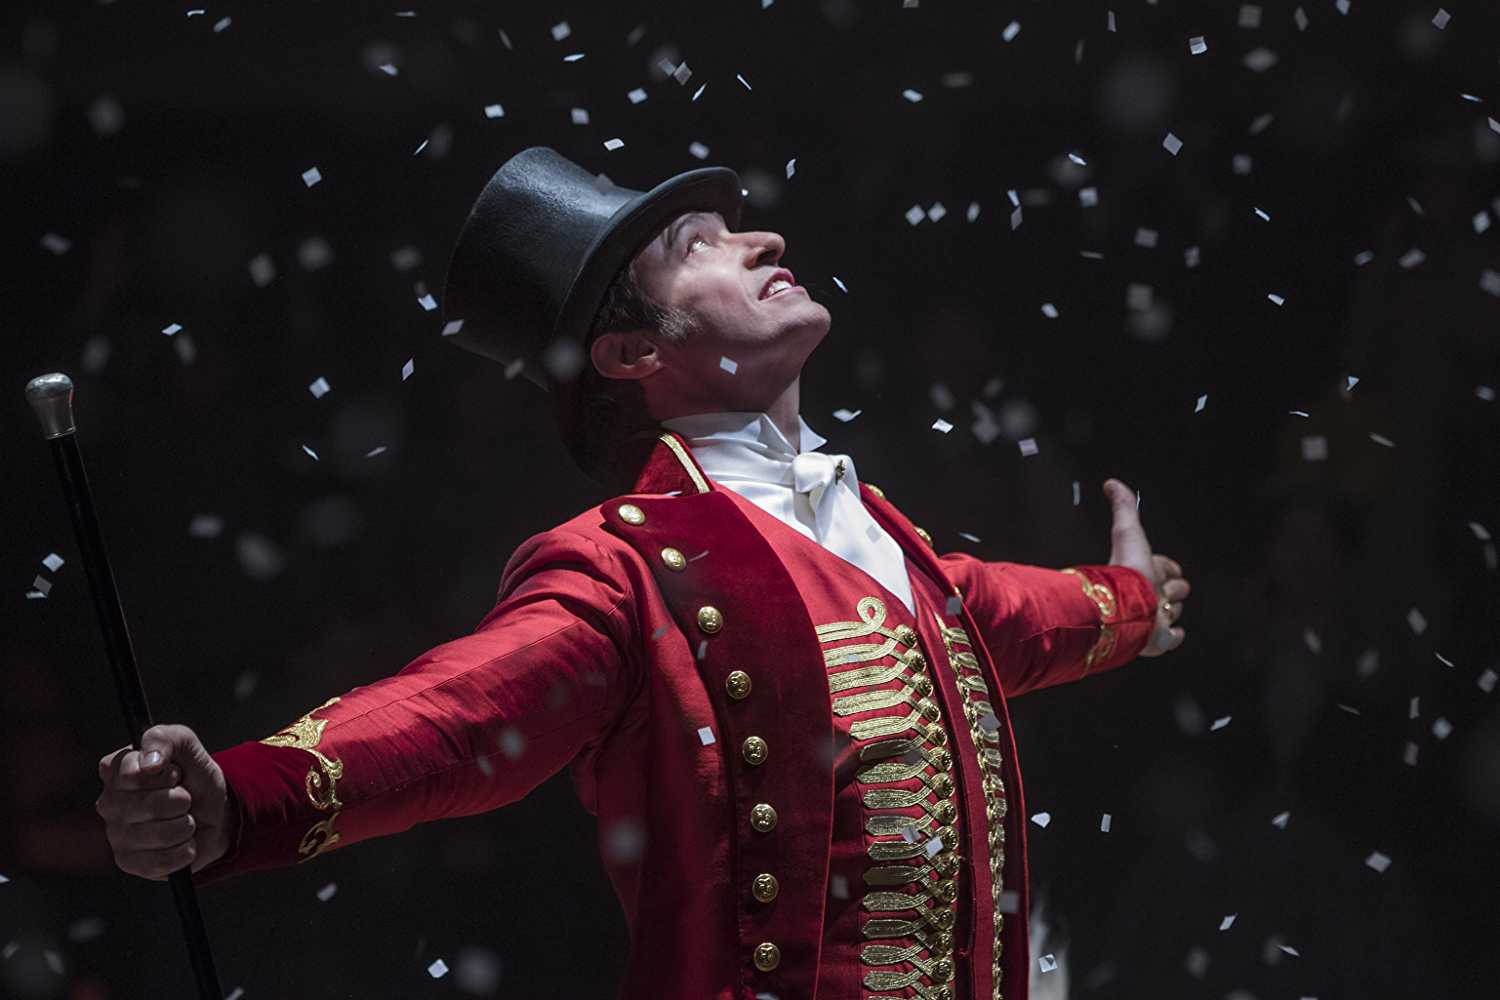 Where to Stream The Greatest Showman?